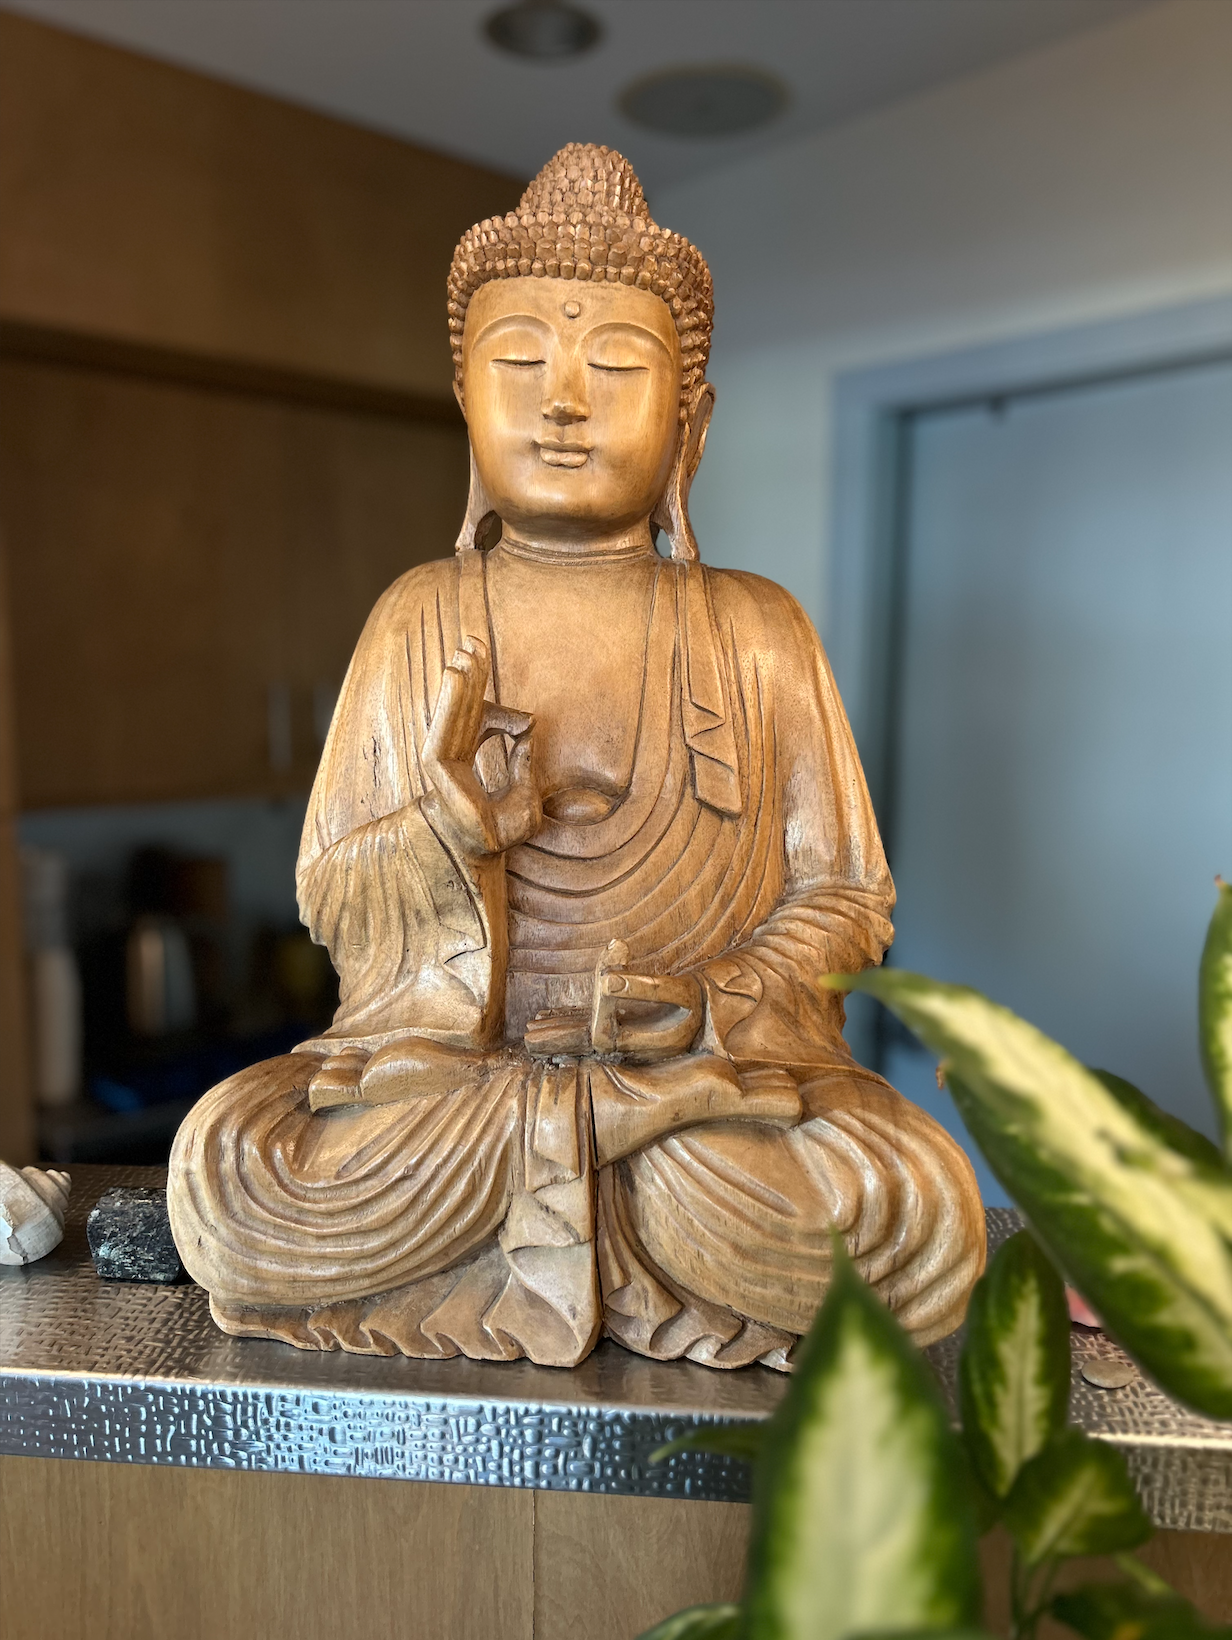 This wooden Buddha has kept our deskers company for many years now. He came to us from a Buddhist shop in South Miami Beach after we renovated the studio in 2006. This Buddha is shown performing vitarka mudra. The right hand makes a circle out of the thumb and forefinger, a symbol of the great wheel of the Buddha’s teaching that rolls onward through time and communities.
Click on this image to see a collection of mudras in Buddhist art!